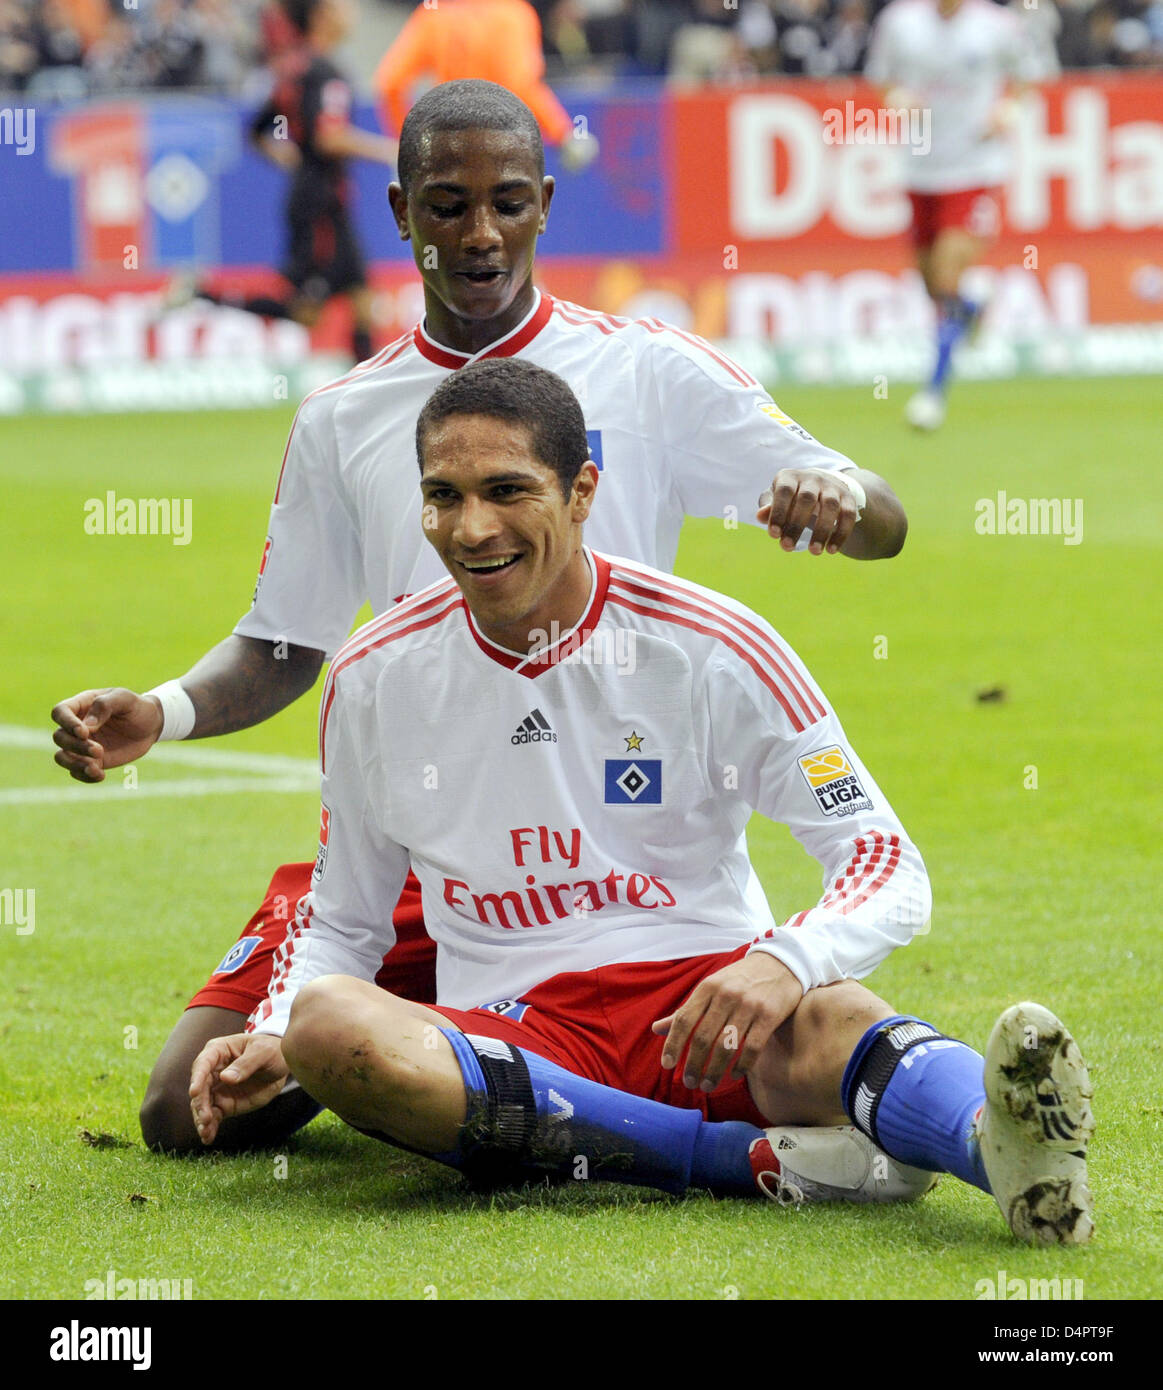 Hamburg?s Jose Paolo Guerrero cheers with Eljero Elia after his goal to 1-0 during the German Bundesliga match SV Hamburg vs Cologne at HSH-Nordbank-Arena stadium in Hamburg, Germany, 30 August 2009. Photo: Marcus Brandt  (ATTENTION: BLOCKING PERIOD! The DFL permits the further utilisation of the pictures in IPTV, mobile services and other new technologies only two hours after the  Stock Photo